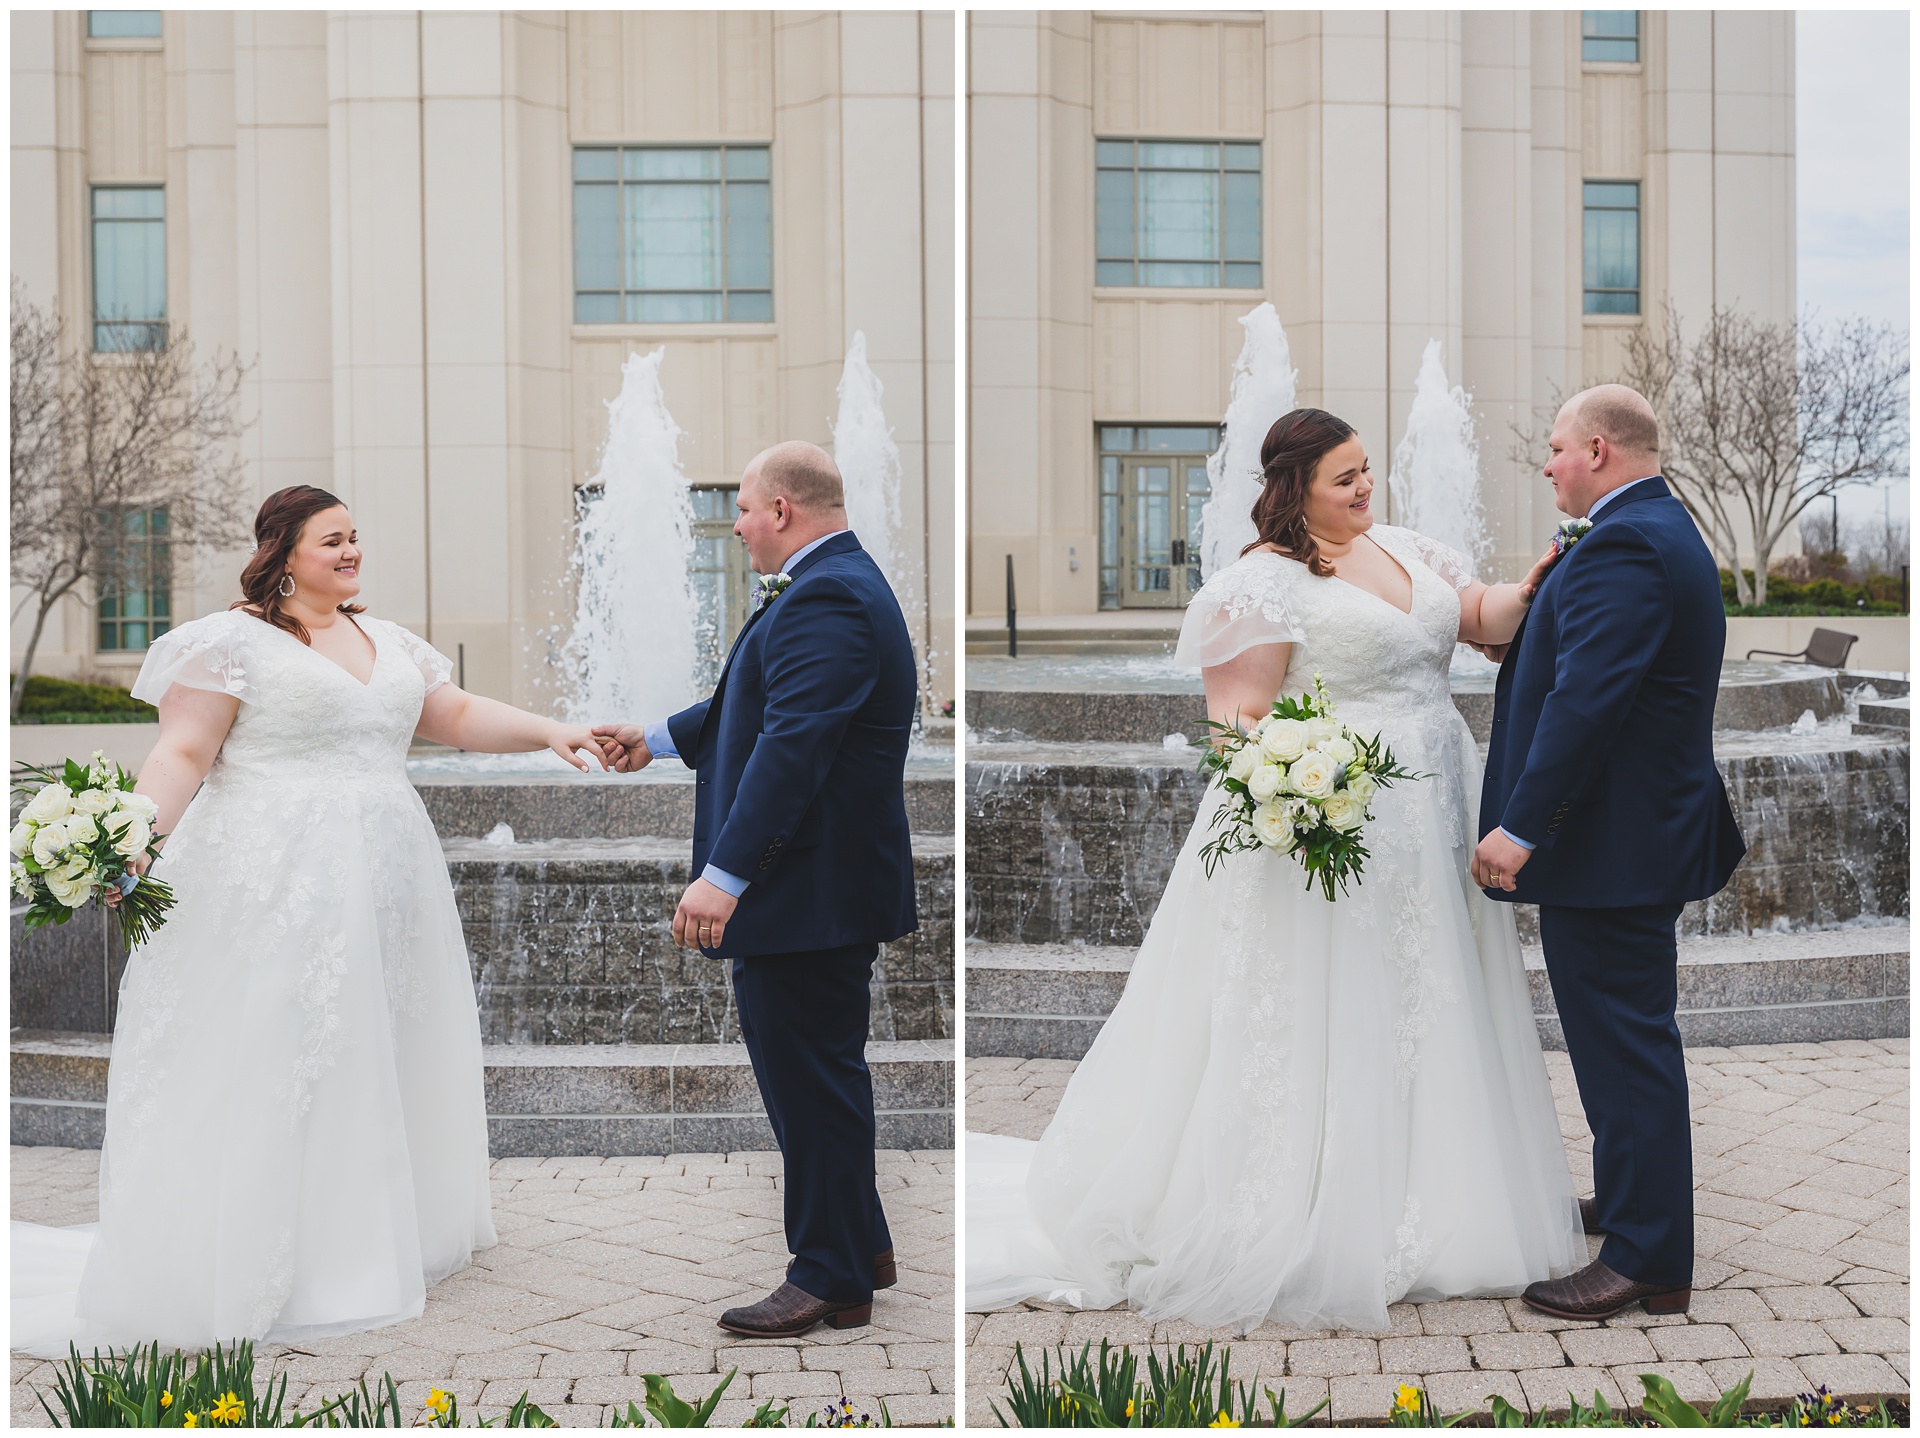 Wedding photography at the LDS Temple and Pinstripes by Kansas City wedding photographers Wisdom-Watson Weddings.